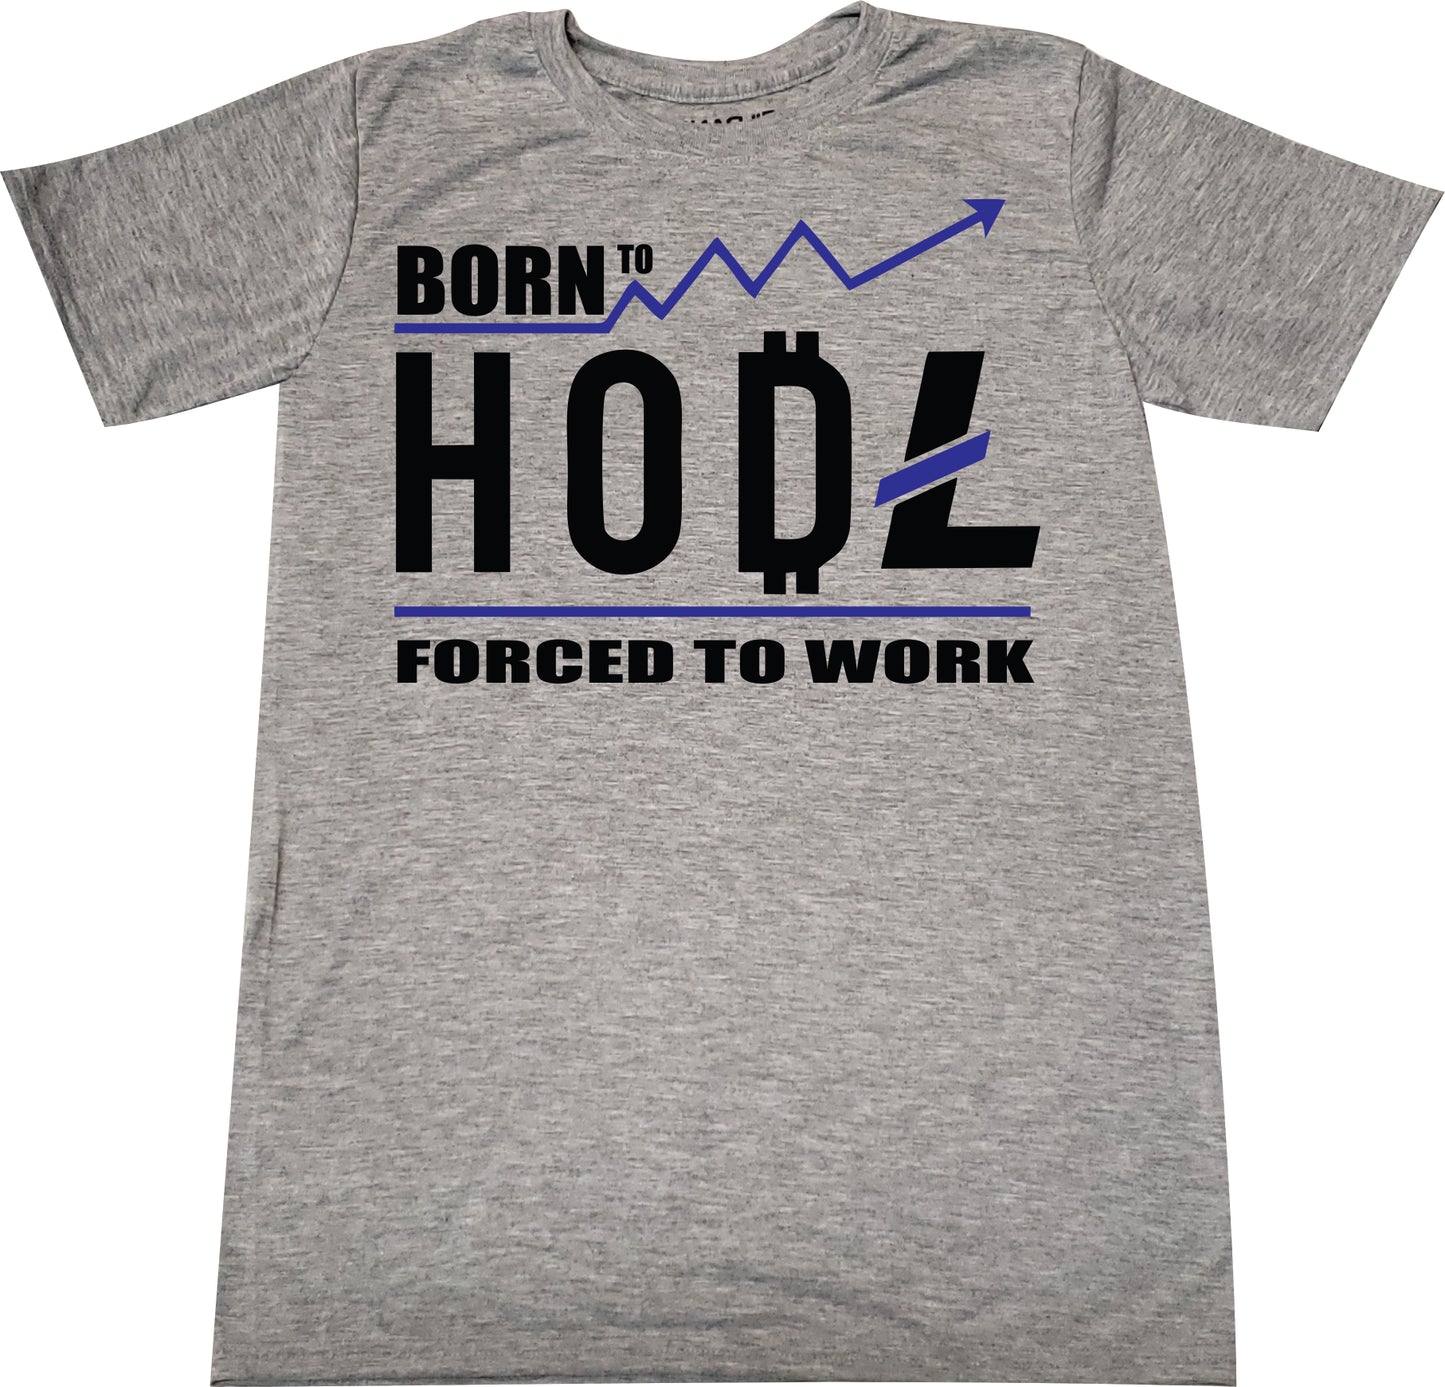 Born to HODL forced to work Bitcoin/Litecoin tshirt